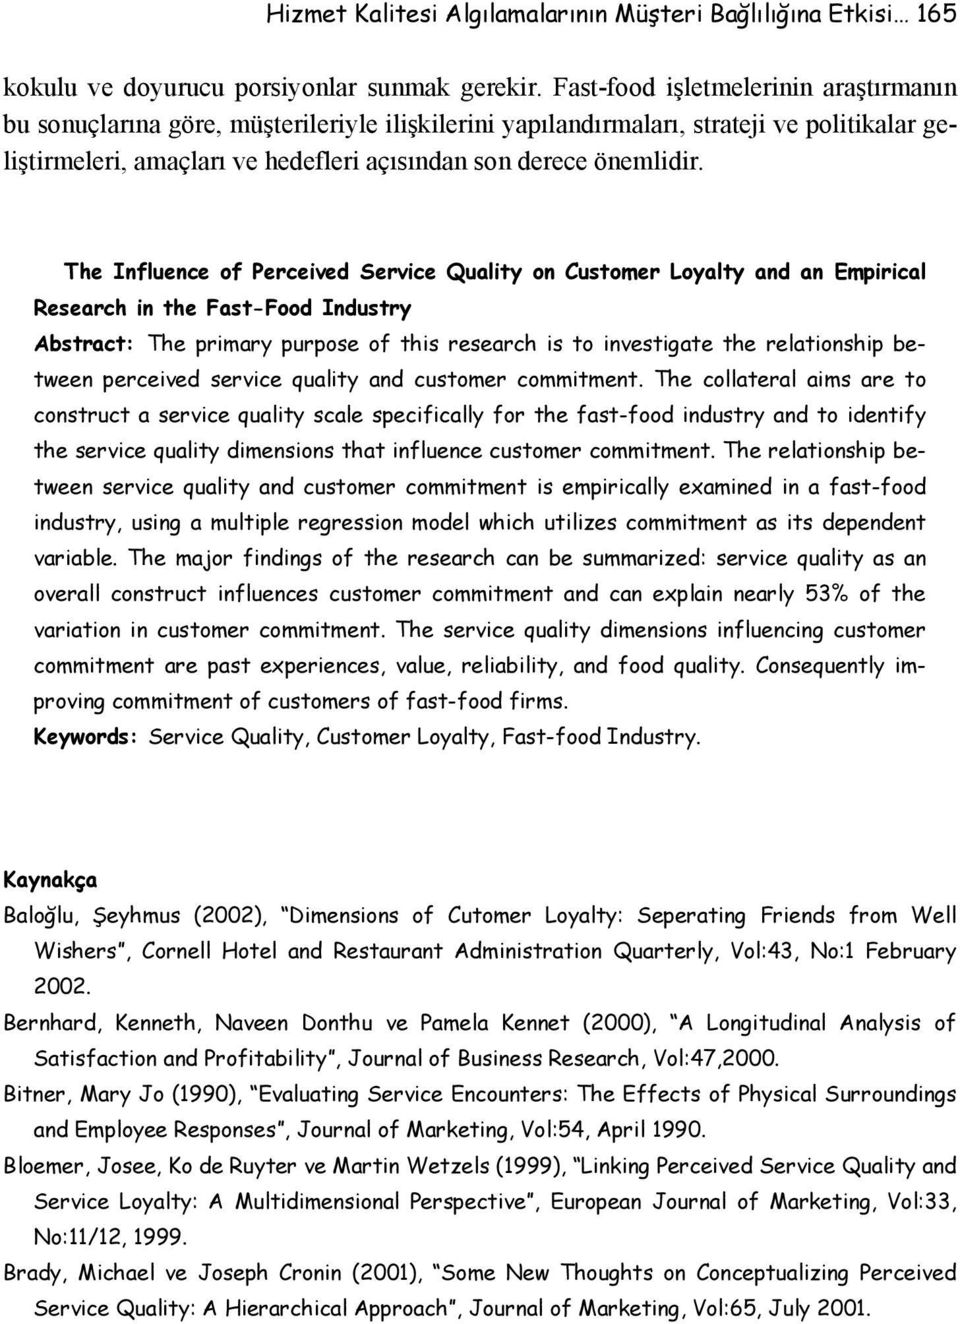 The Influence of Perceived Service Quality on Customer Loyalty and an Empirical Research in the Fast-Food Industry Abstract: The primary purpose of this research is to investigate the relationship